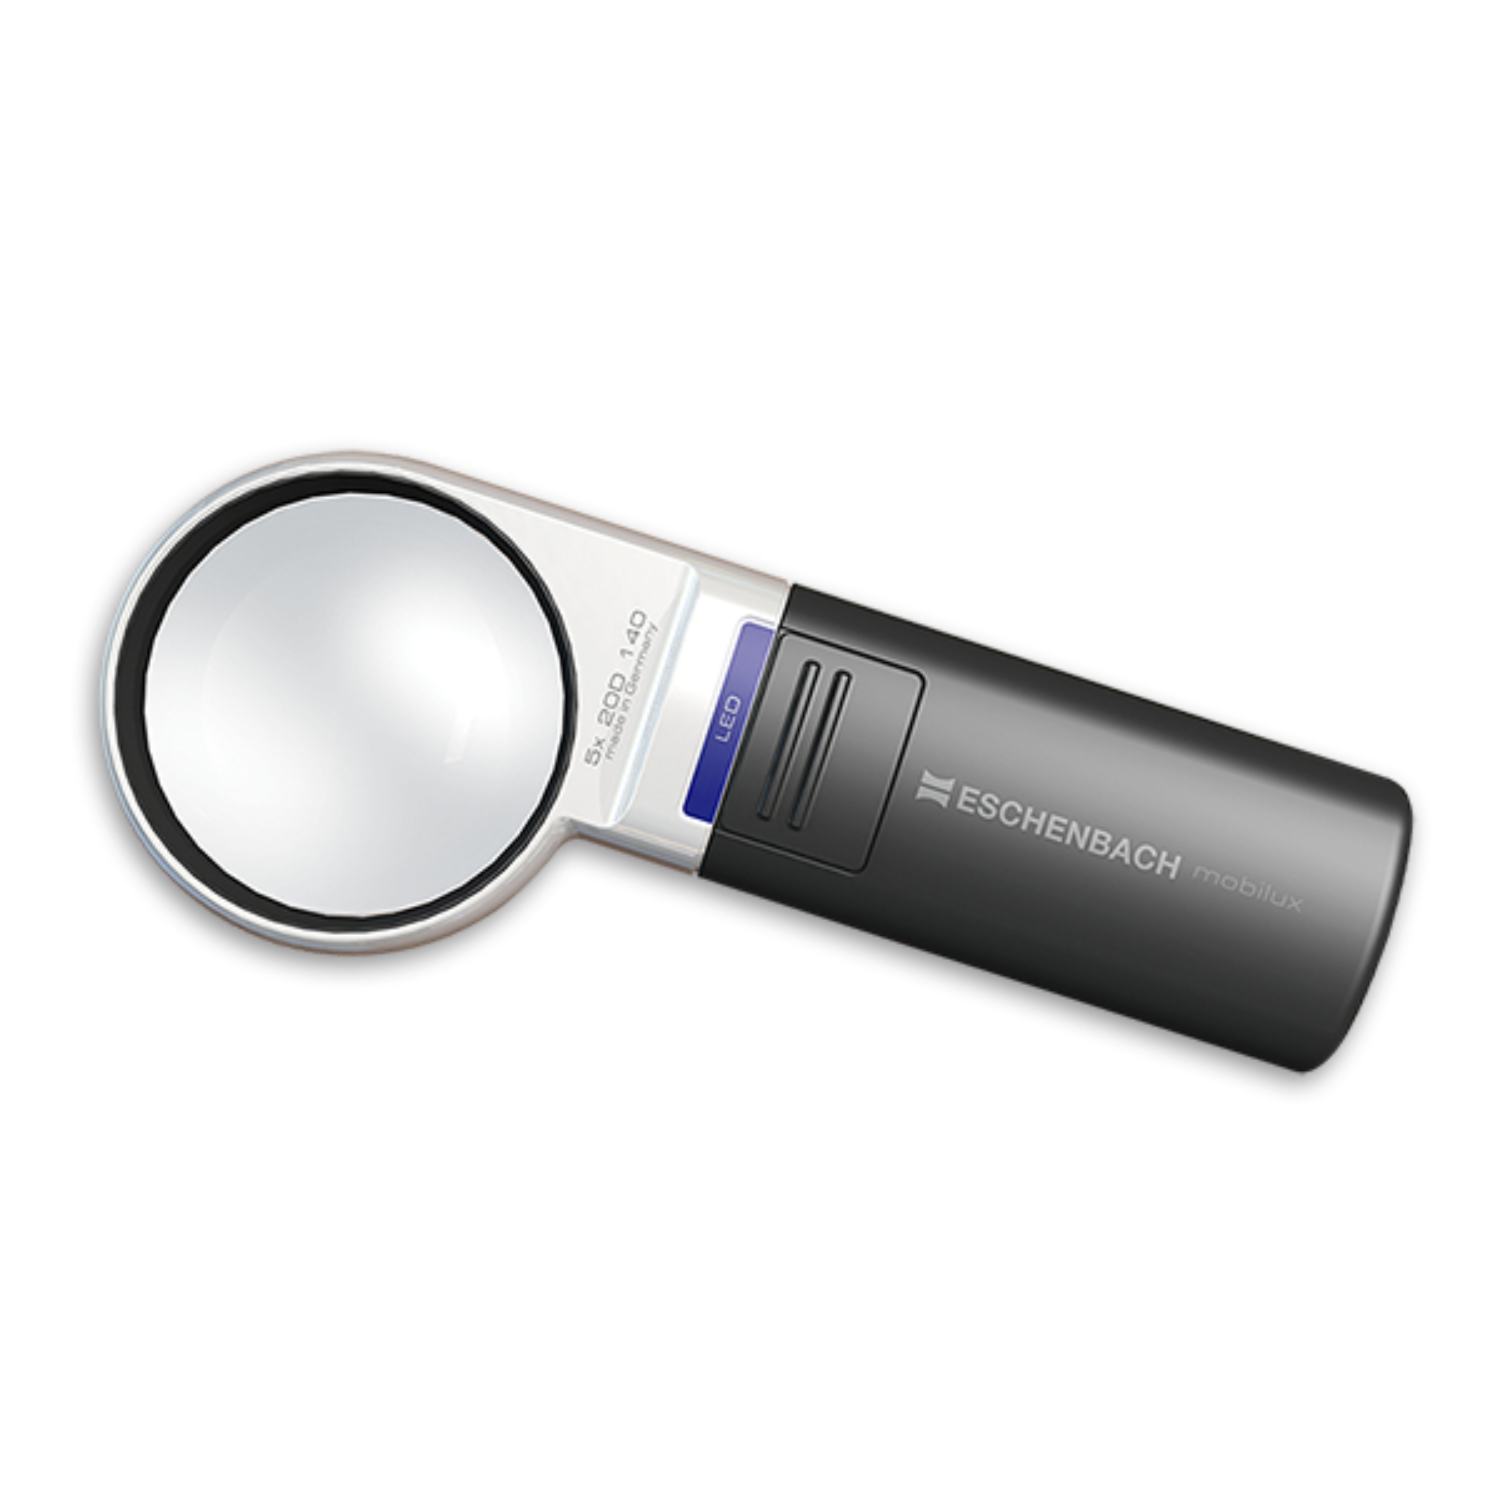 Mobilux Led Round Handheld Magnifier